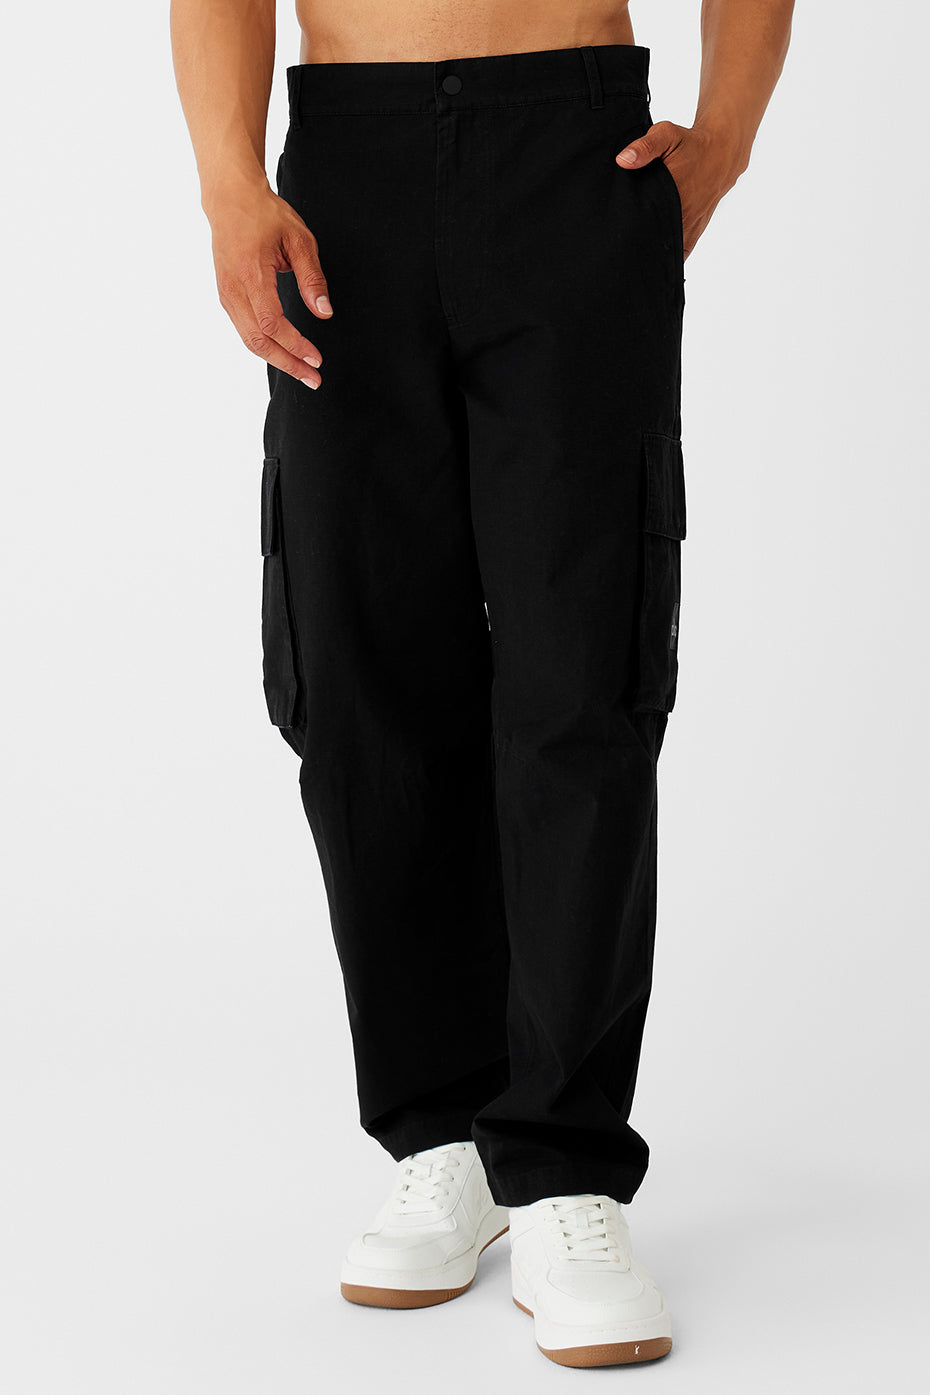  Cargo Pants for Women Relaxed Fit Open Bottom Yoga